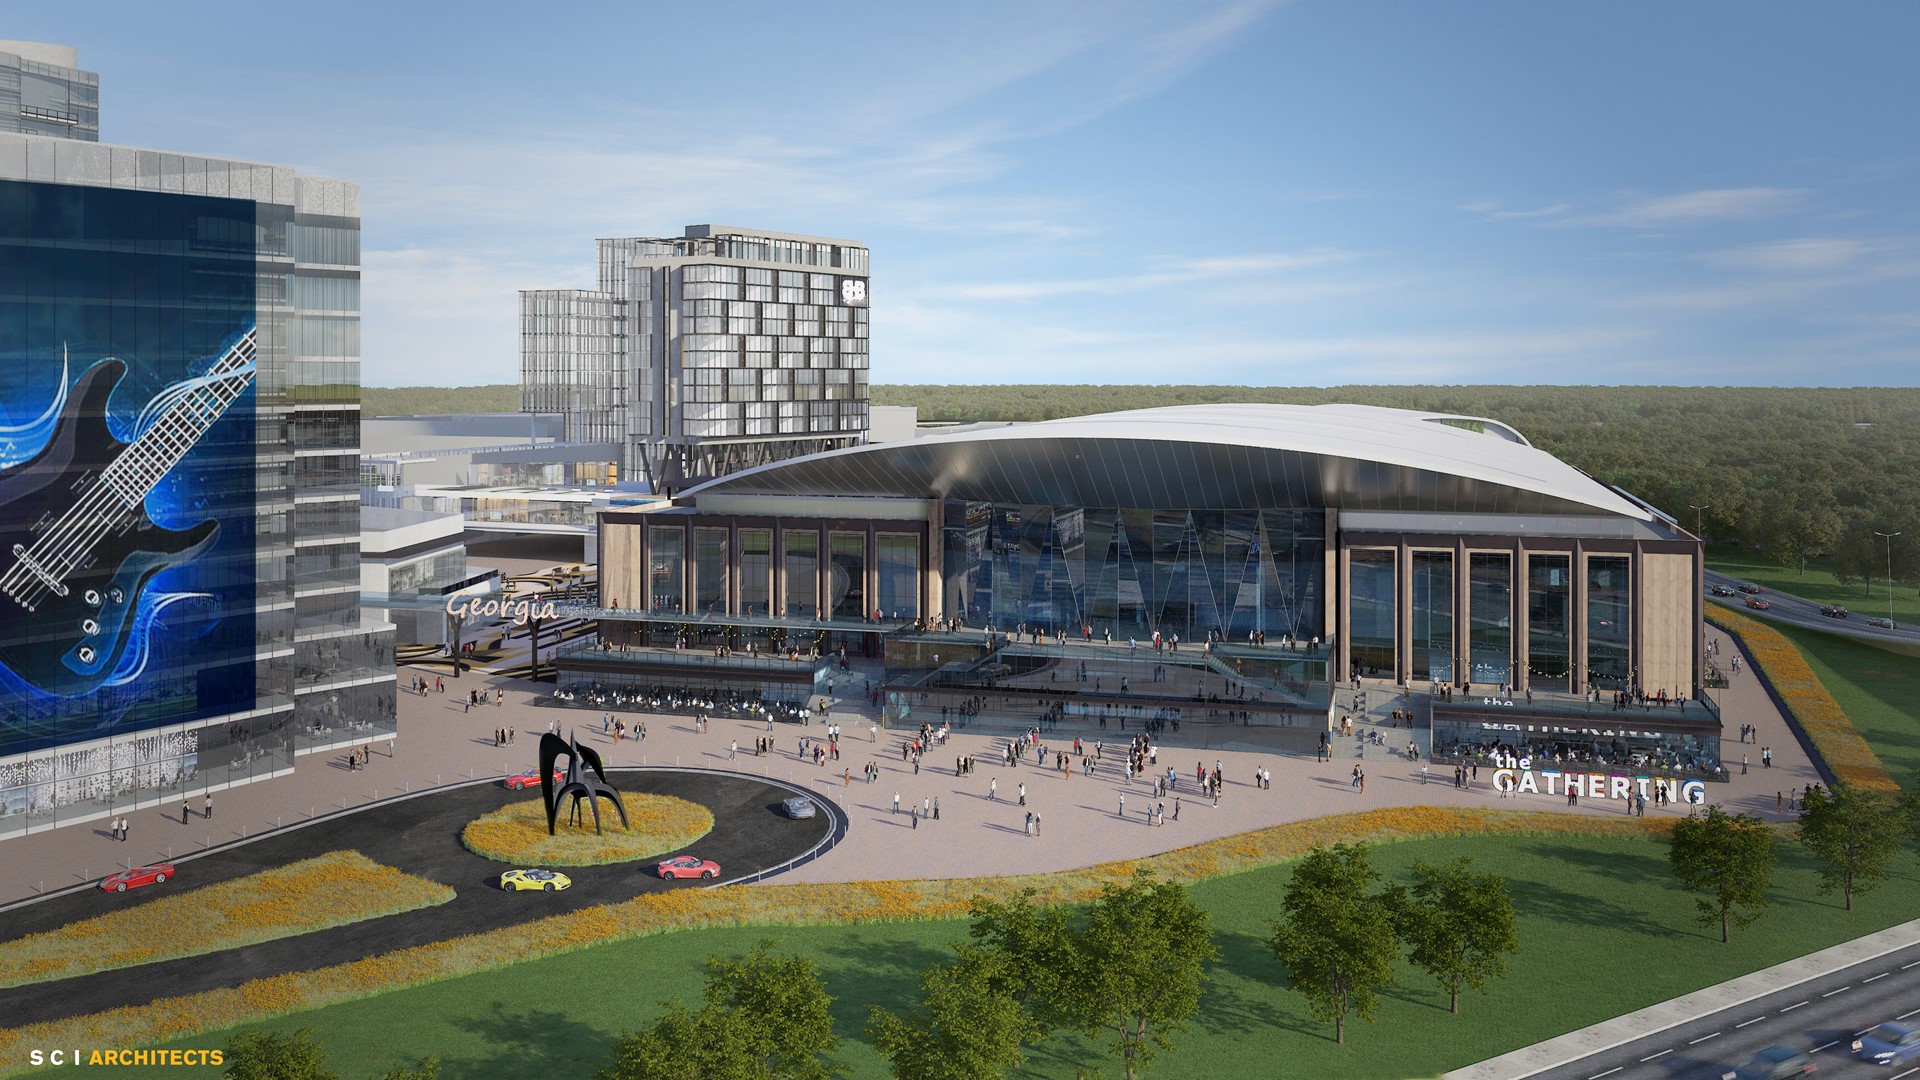 During the meeting, the board of commissioners voted 4-1 to move forward on the progress of "The Gathering" -- a more than $1 billion entertainment complex.